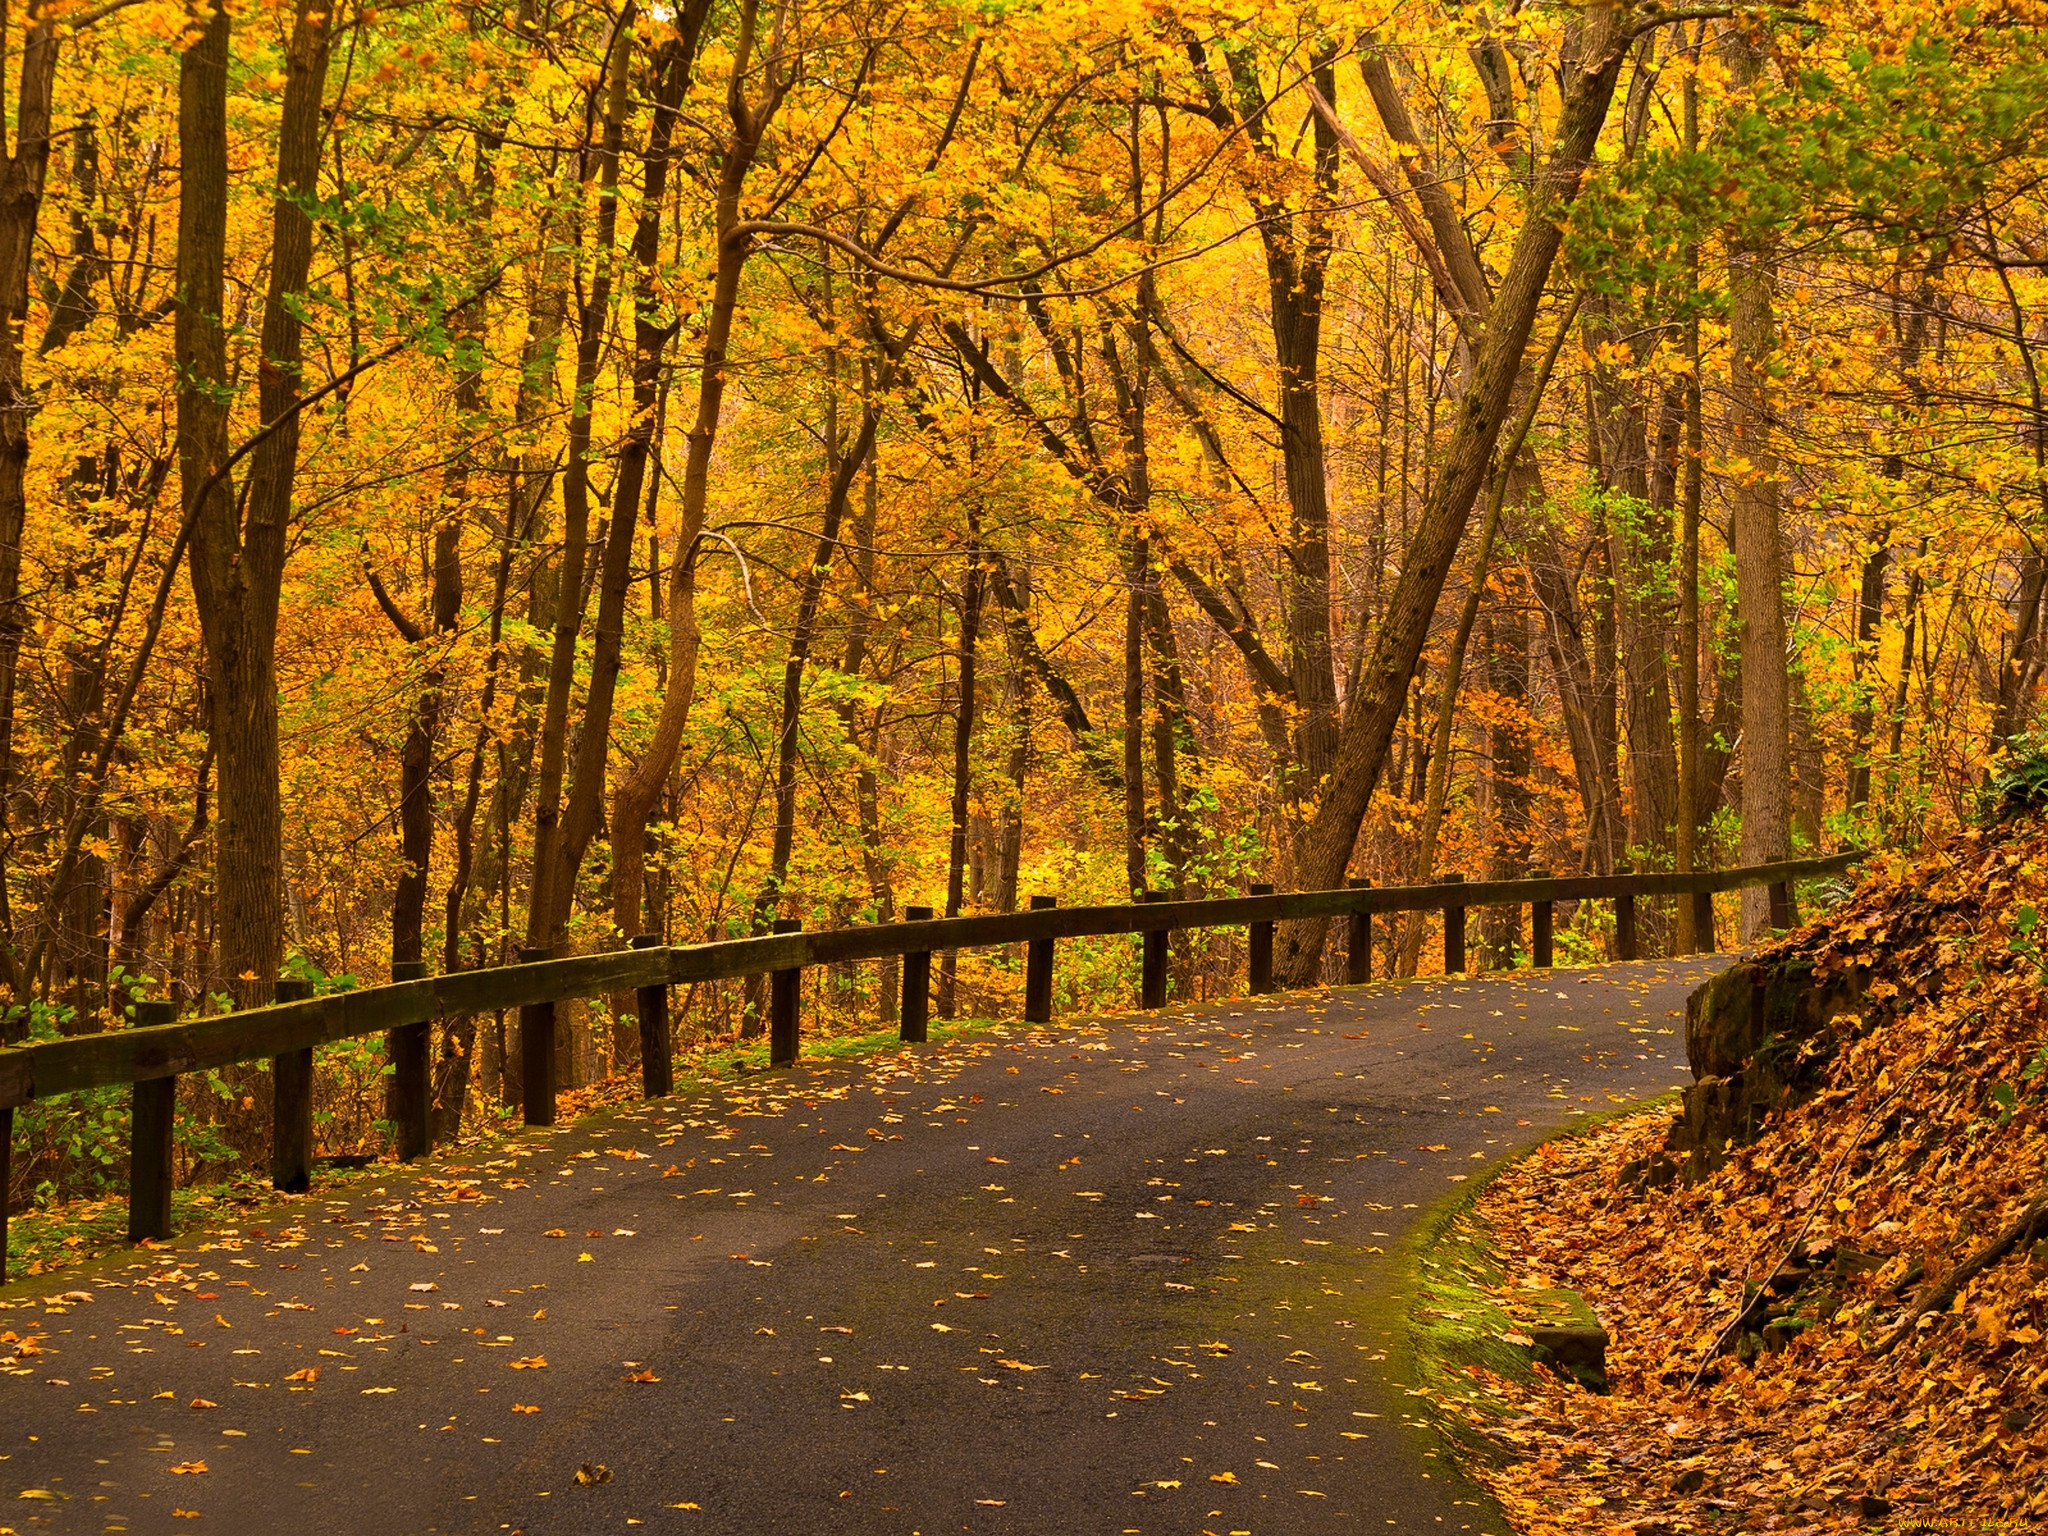 , , , , , , , , nature, path, road, colorful, leaves, trees, park, forest, walk, colors, fall, autumn